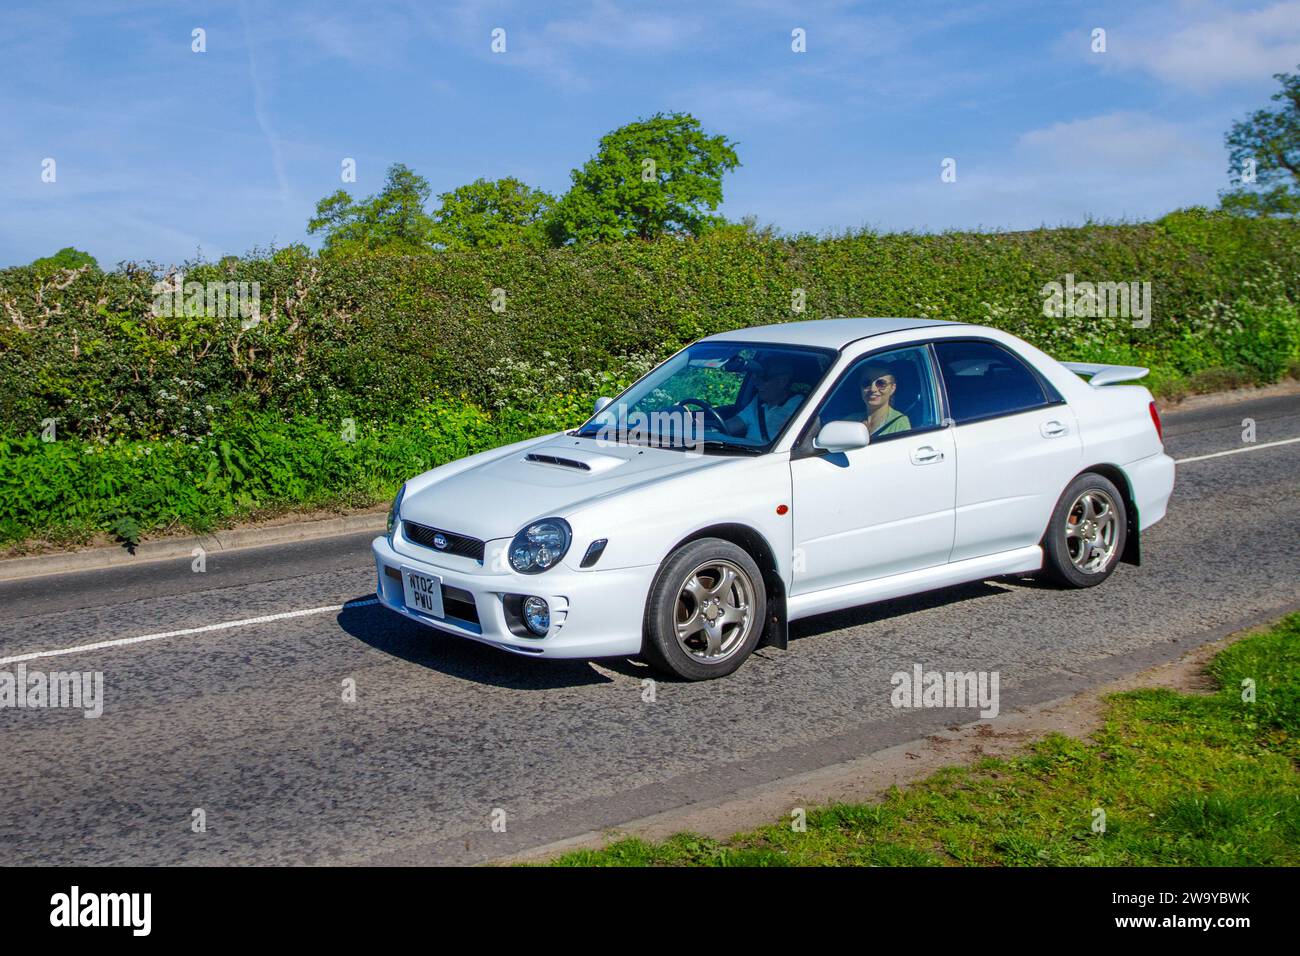 2002 White Subaru WRX 1990 cc petrol; Vintage restored classic specialist motors vehicle restoration, automobile collectors, yesteryear motoring enthusiasts and historic veteran cars travelling in Cheshire, UK Stock Photo